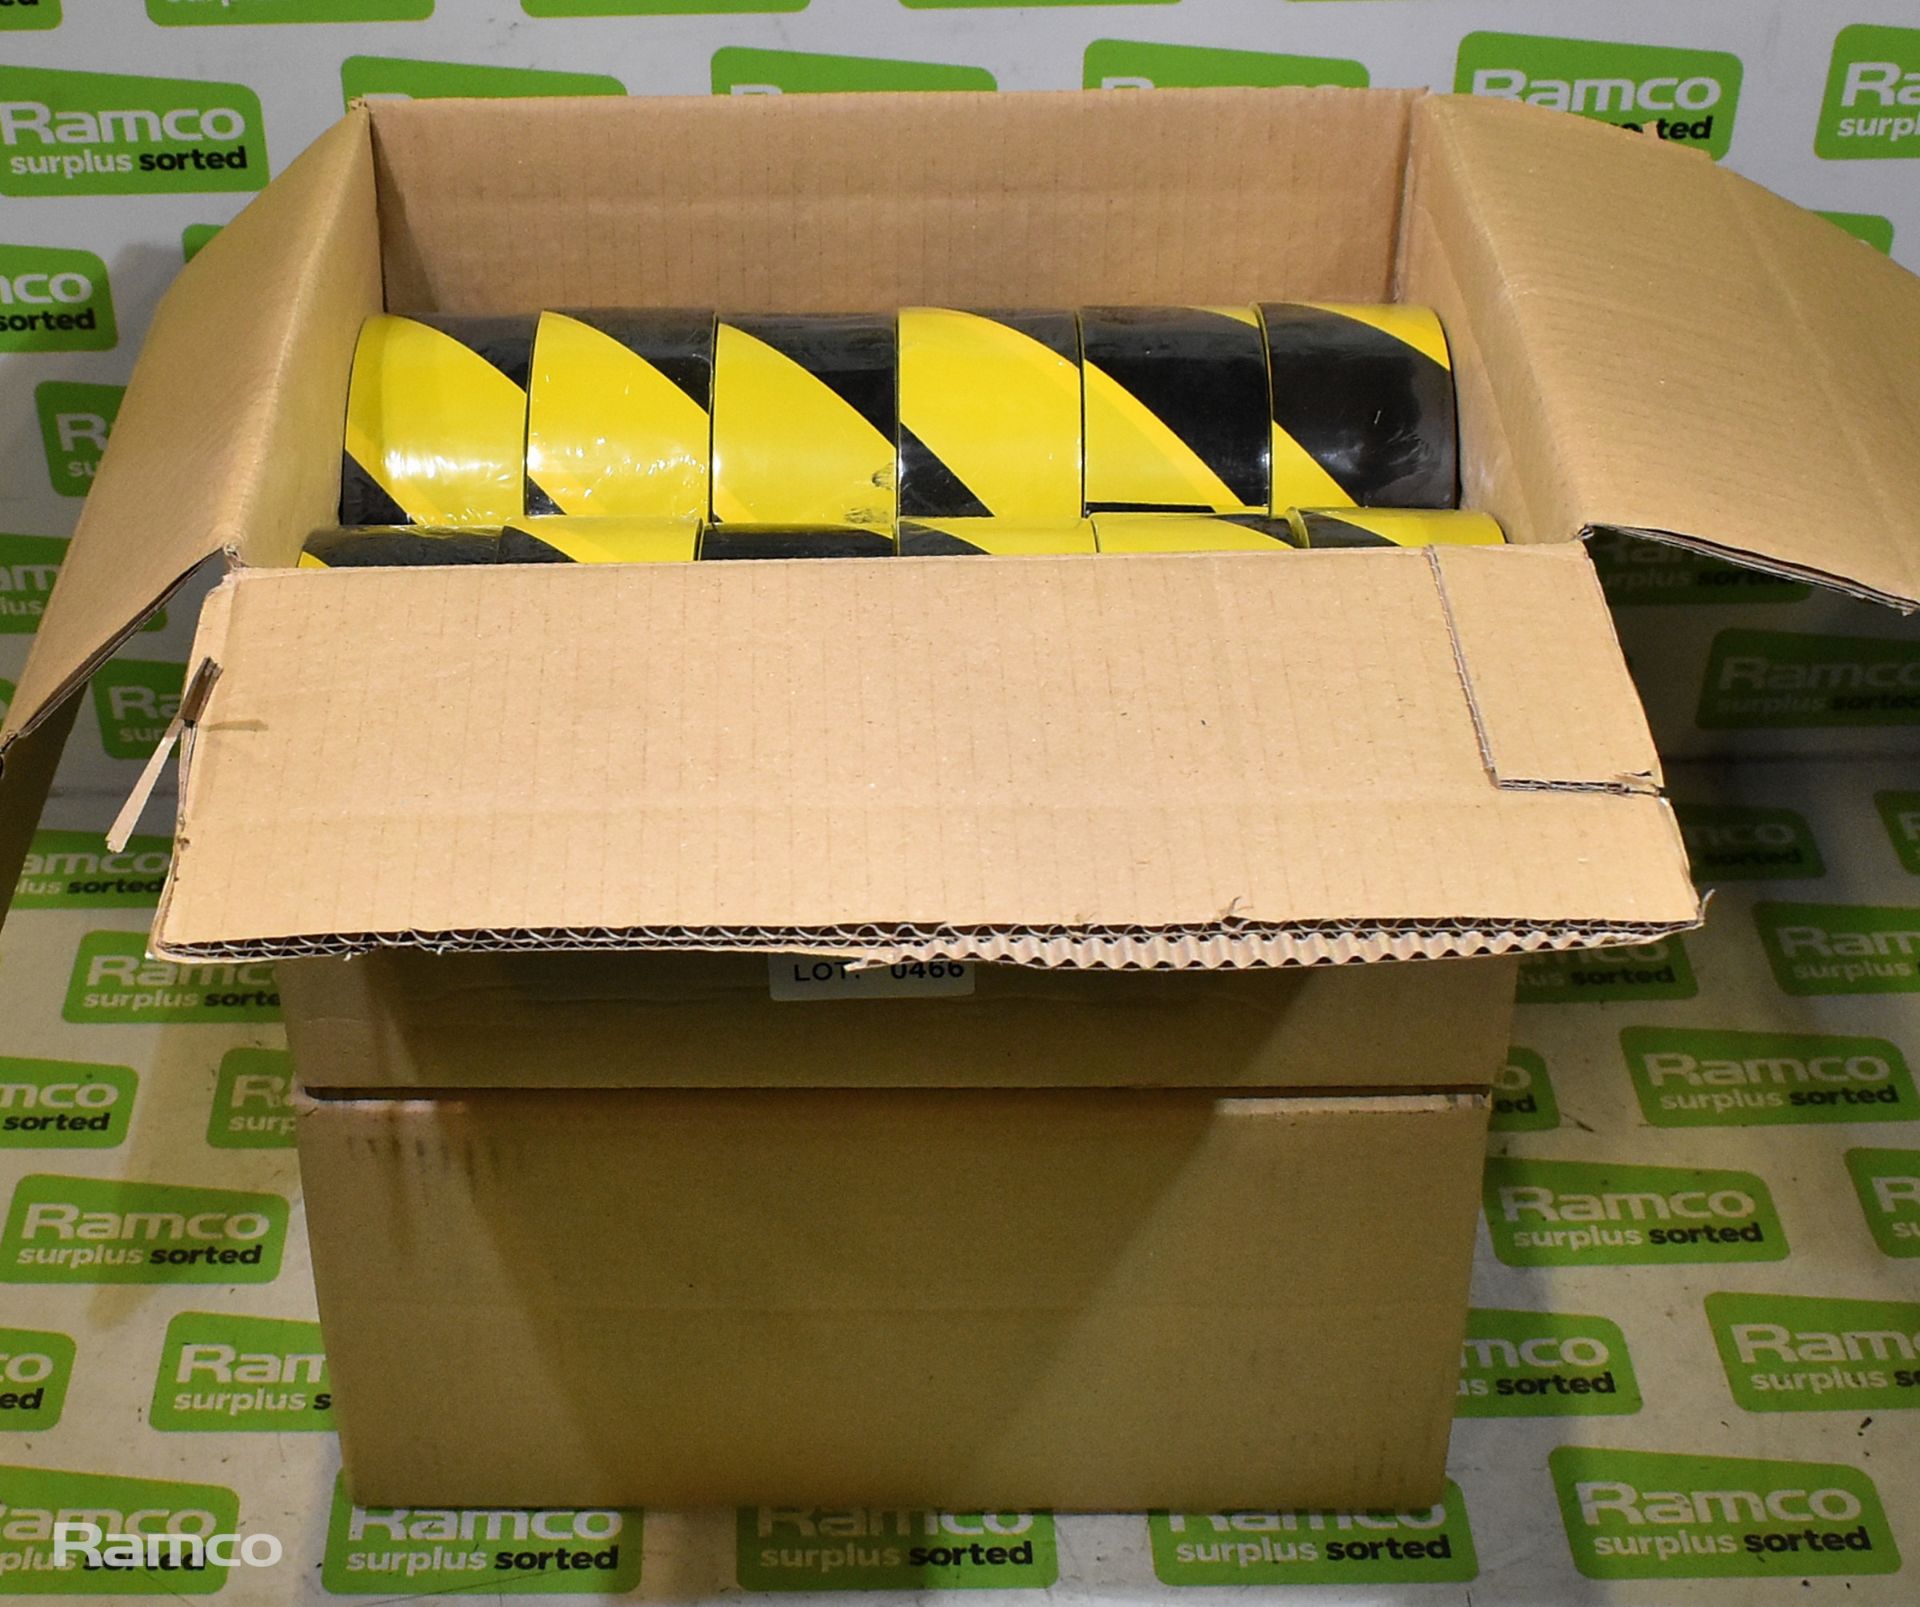 2x boxes of Black and yellow hazard tape - 12 rolls per box - Image 2 of 4